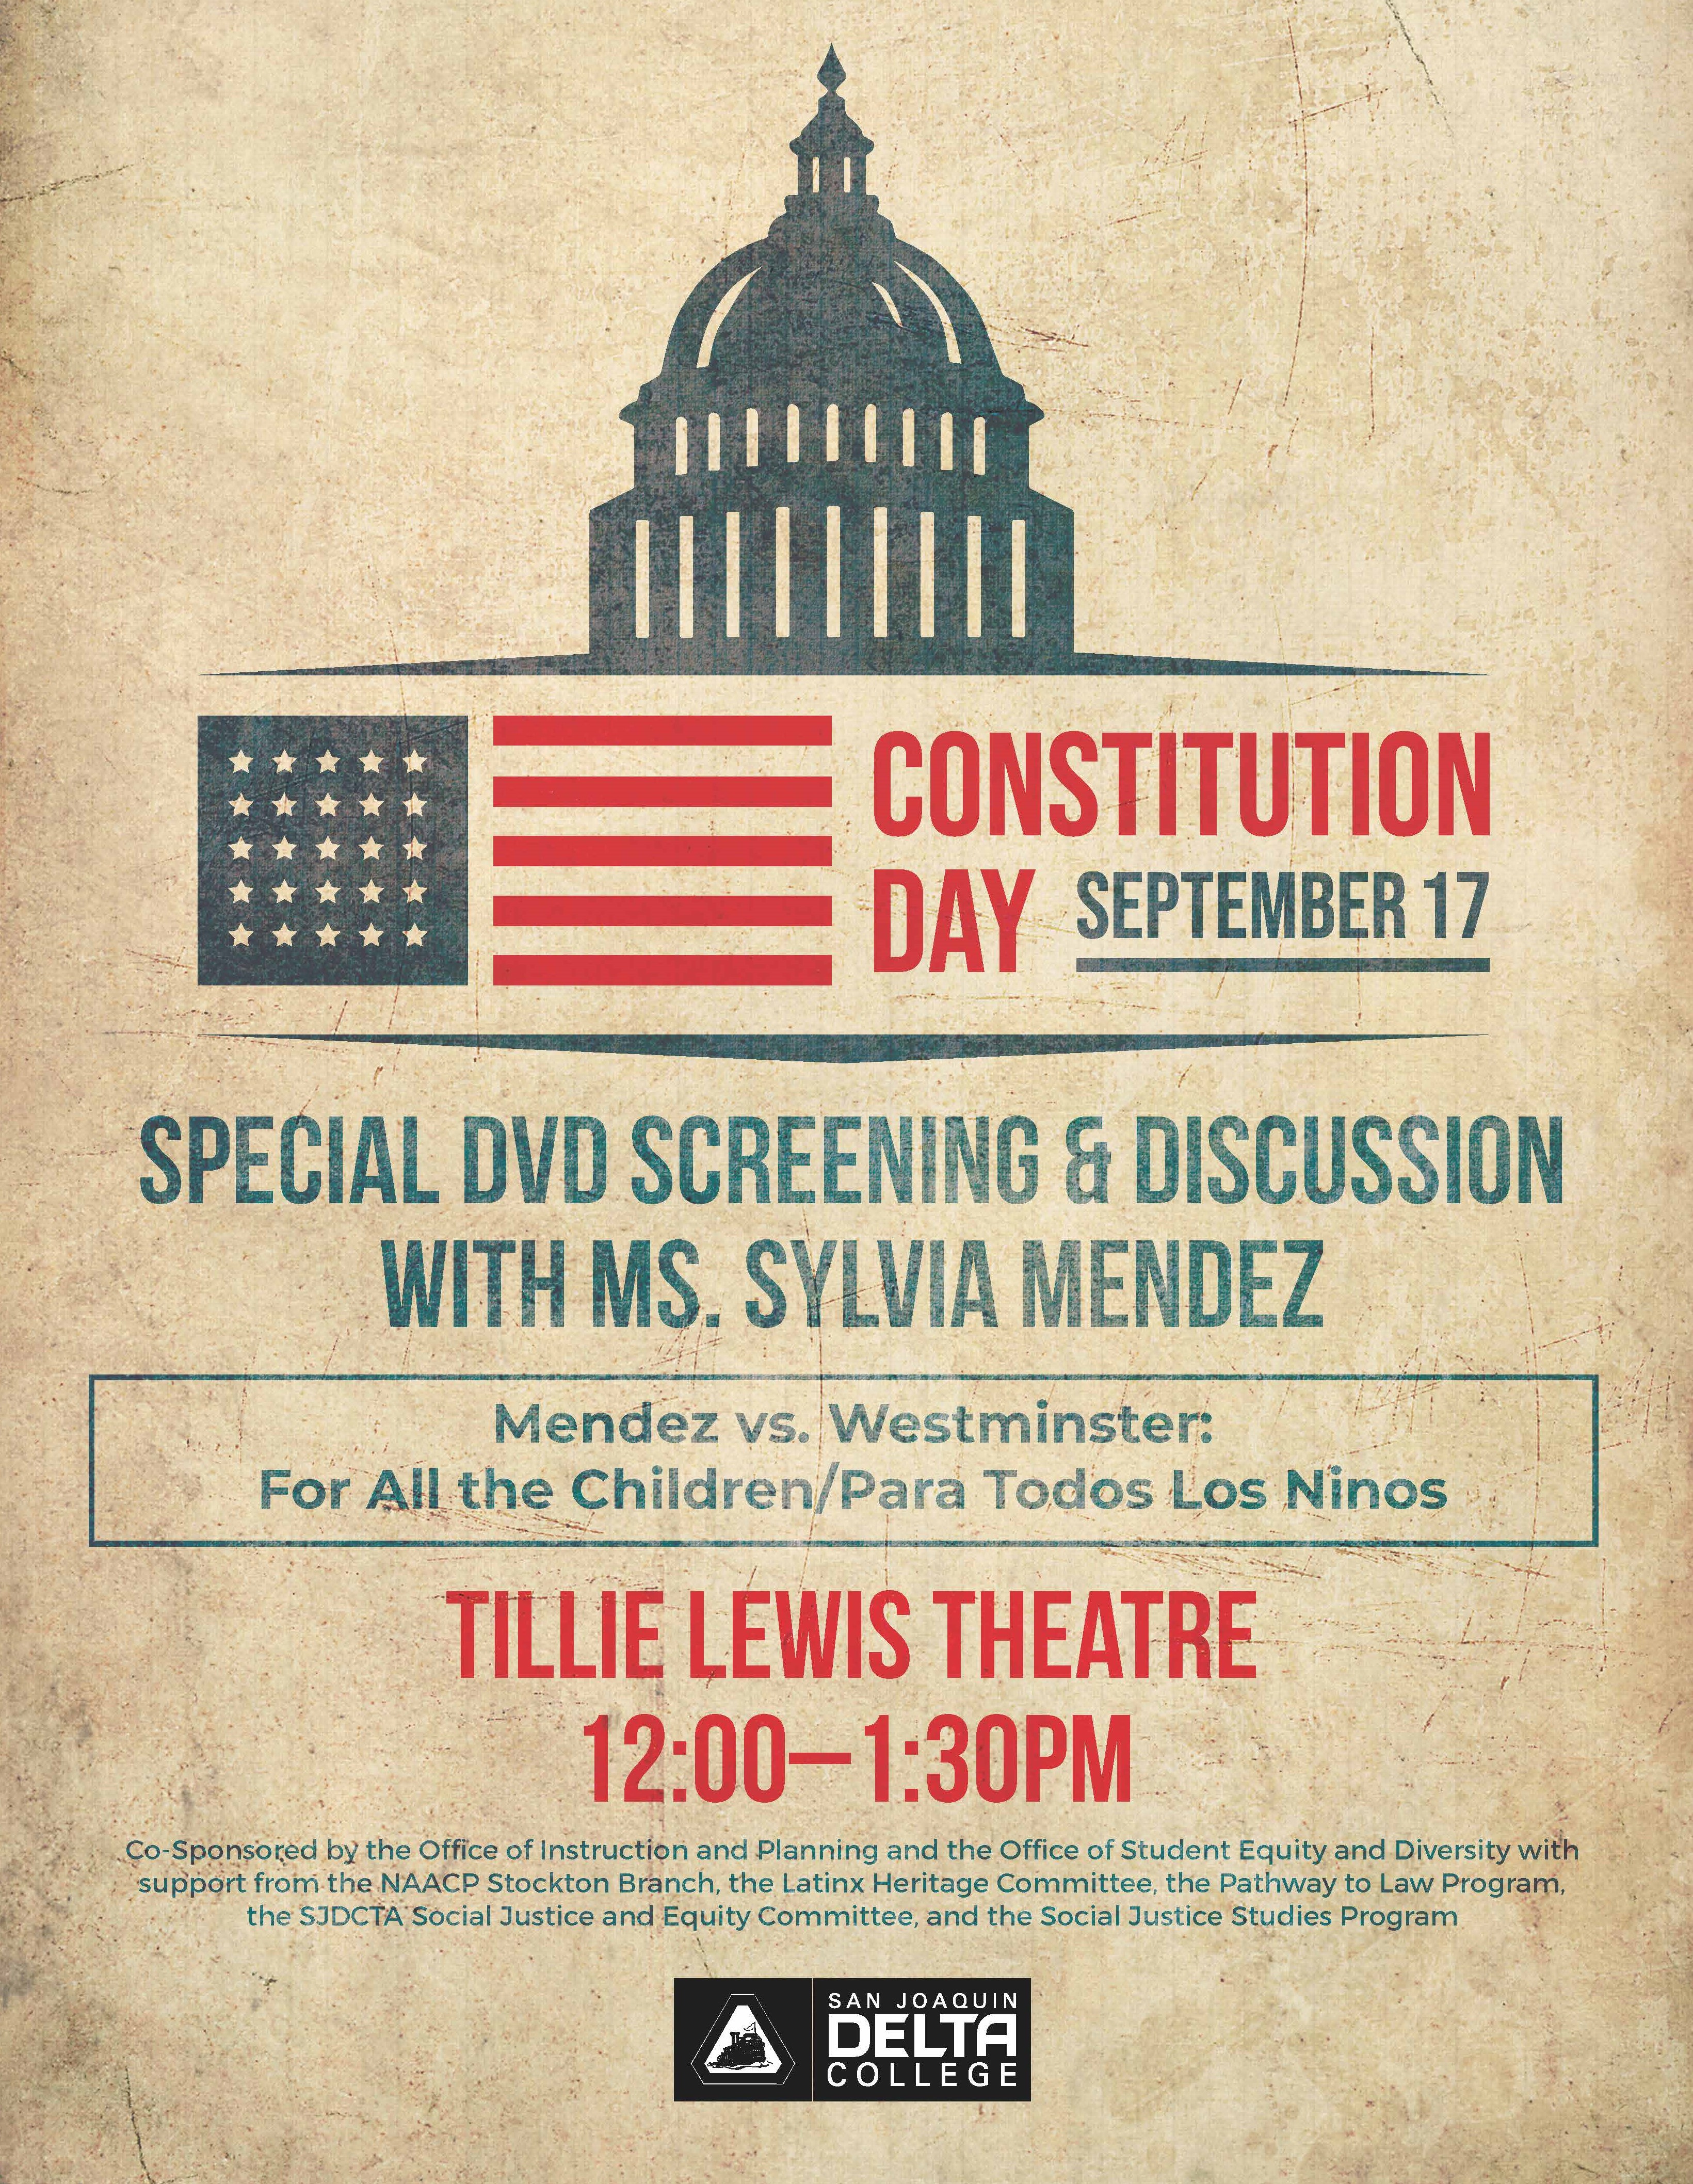 Presidential Medal of Freedom recipient Sylvia Mendez will be on hand for a special Constitution Day film screening at San Joaquin Delta College.